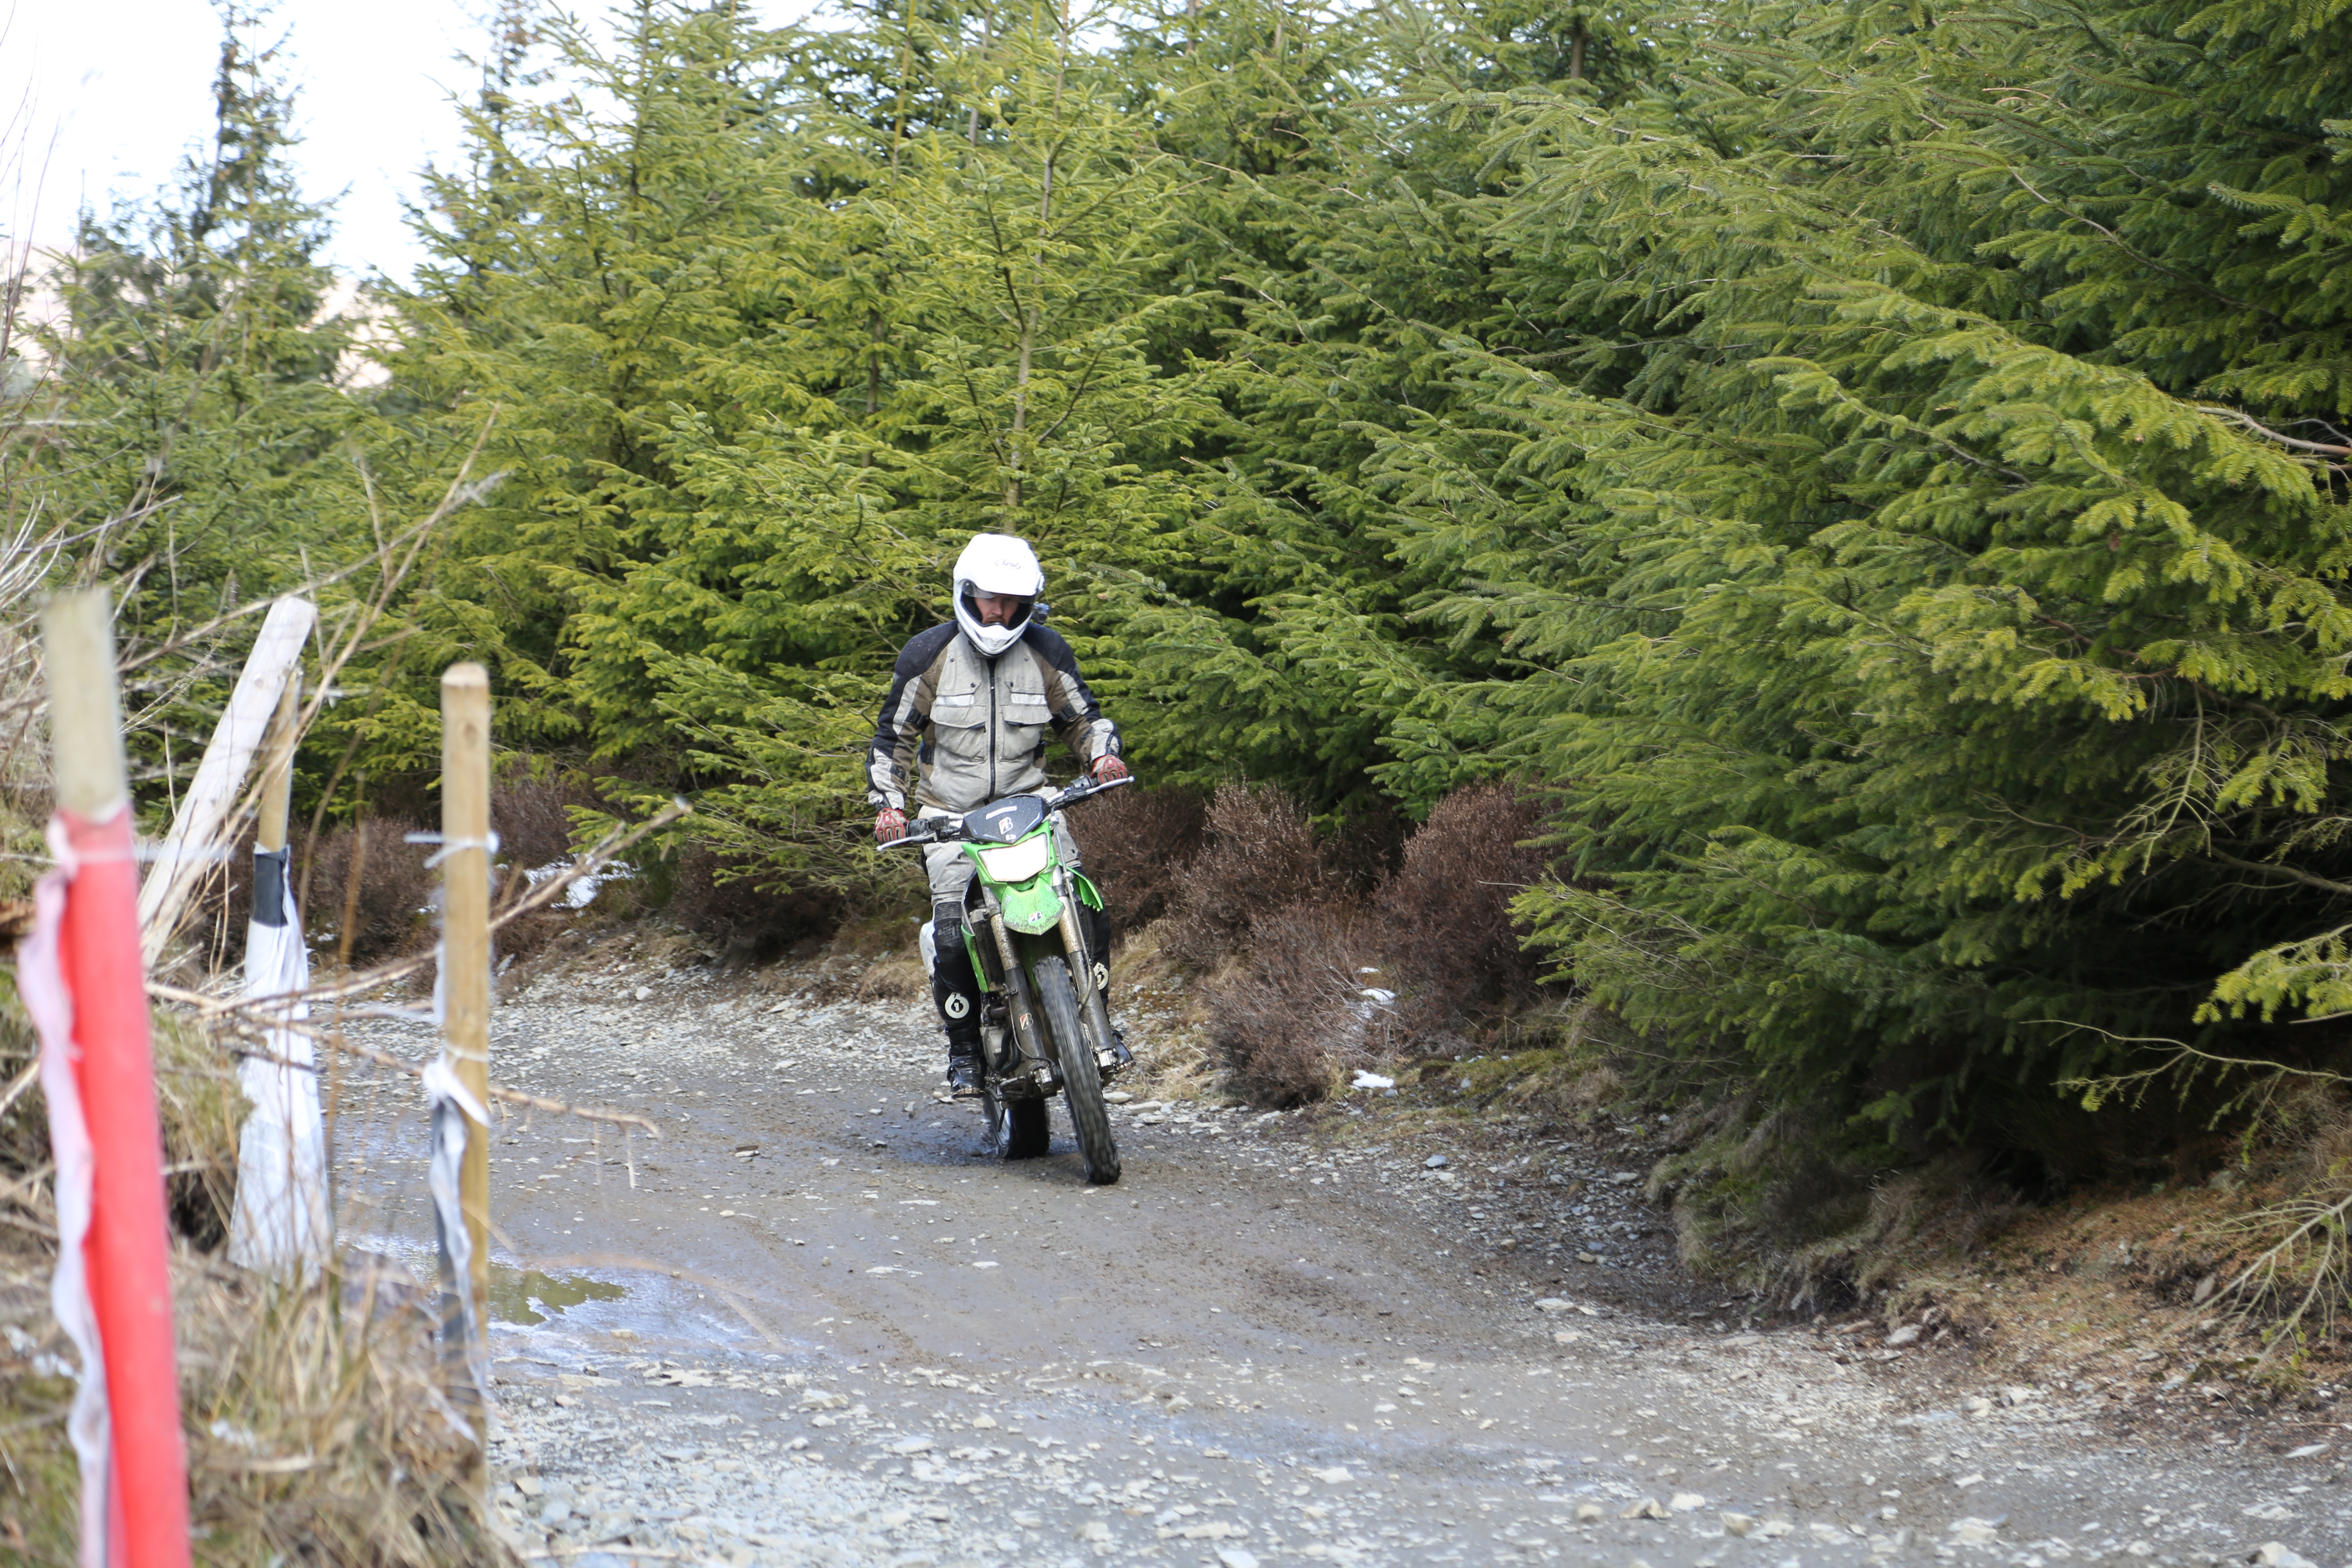 Review: Mick Extance Enduro Experience